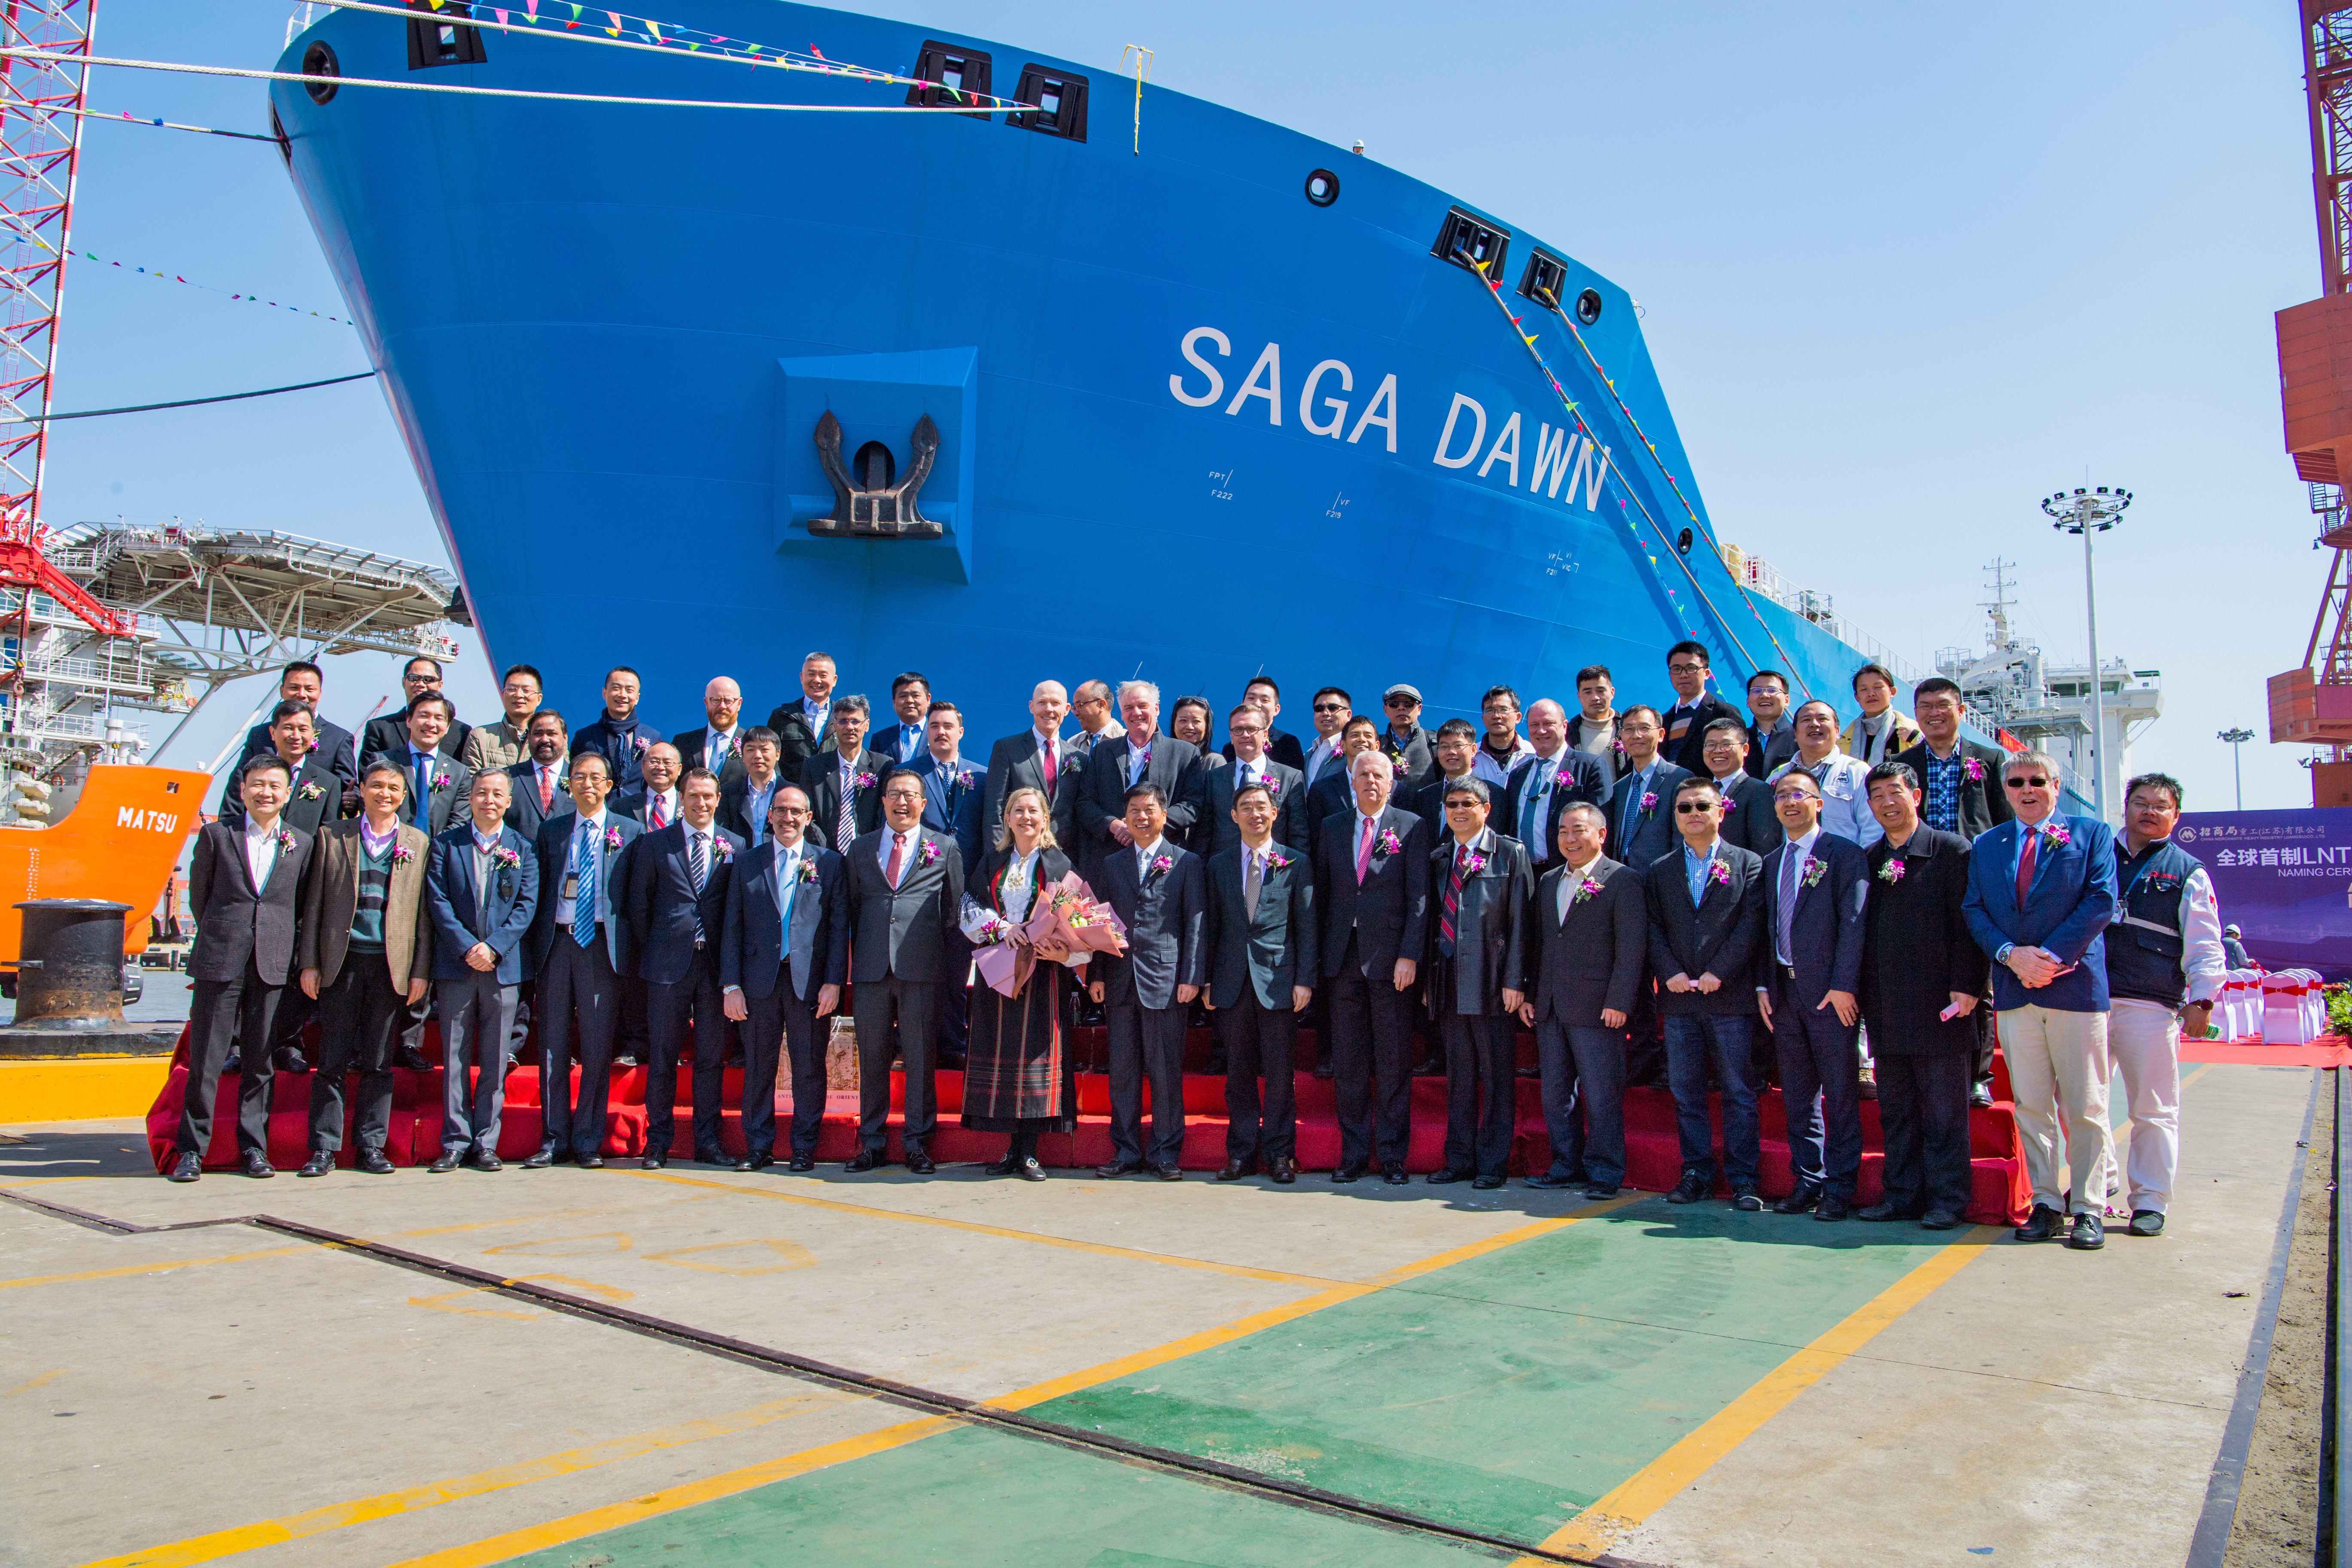 Saga LNG Shipping names its mid-size carrier